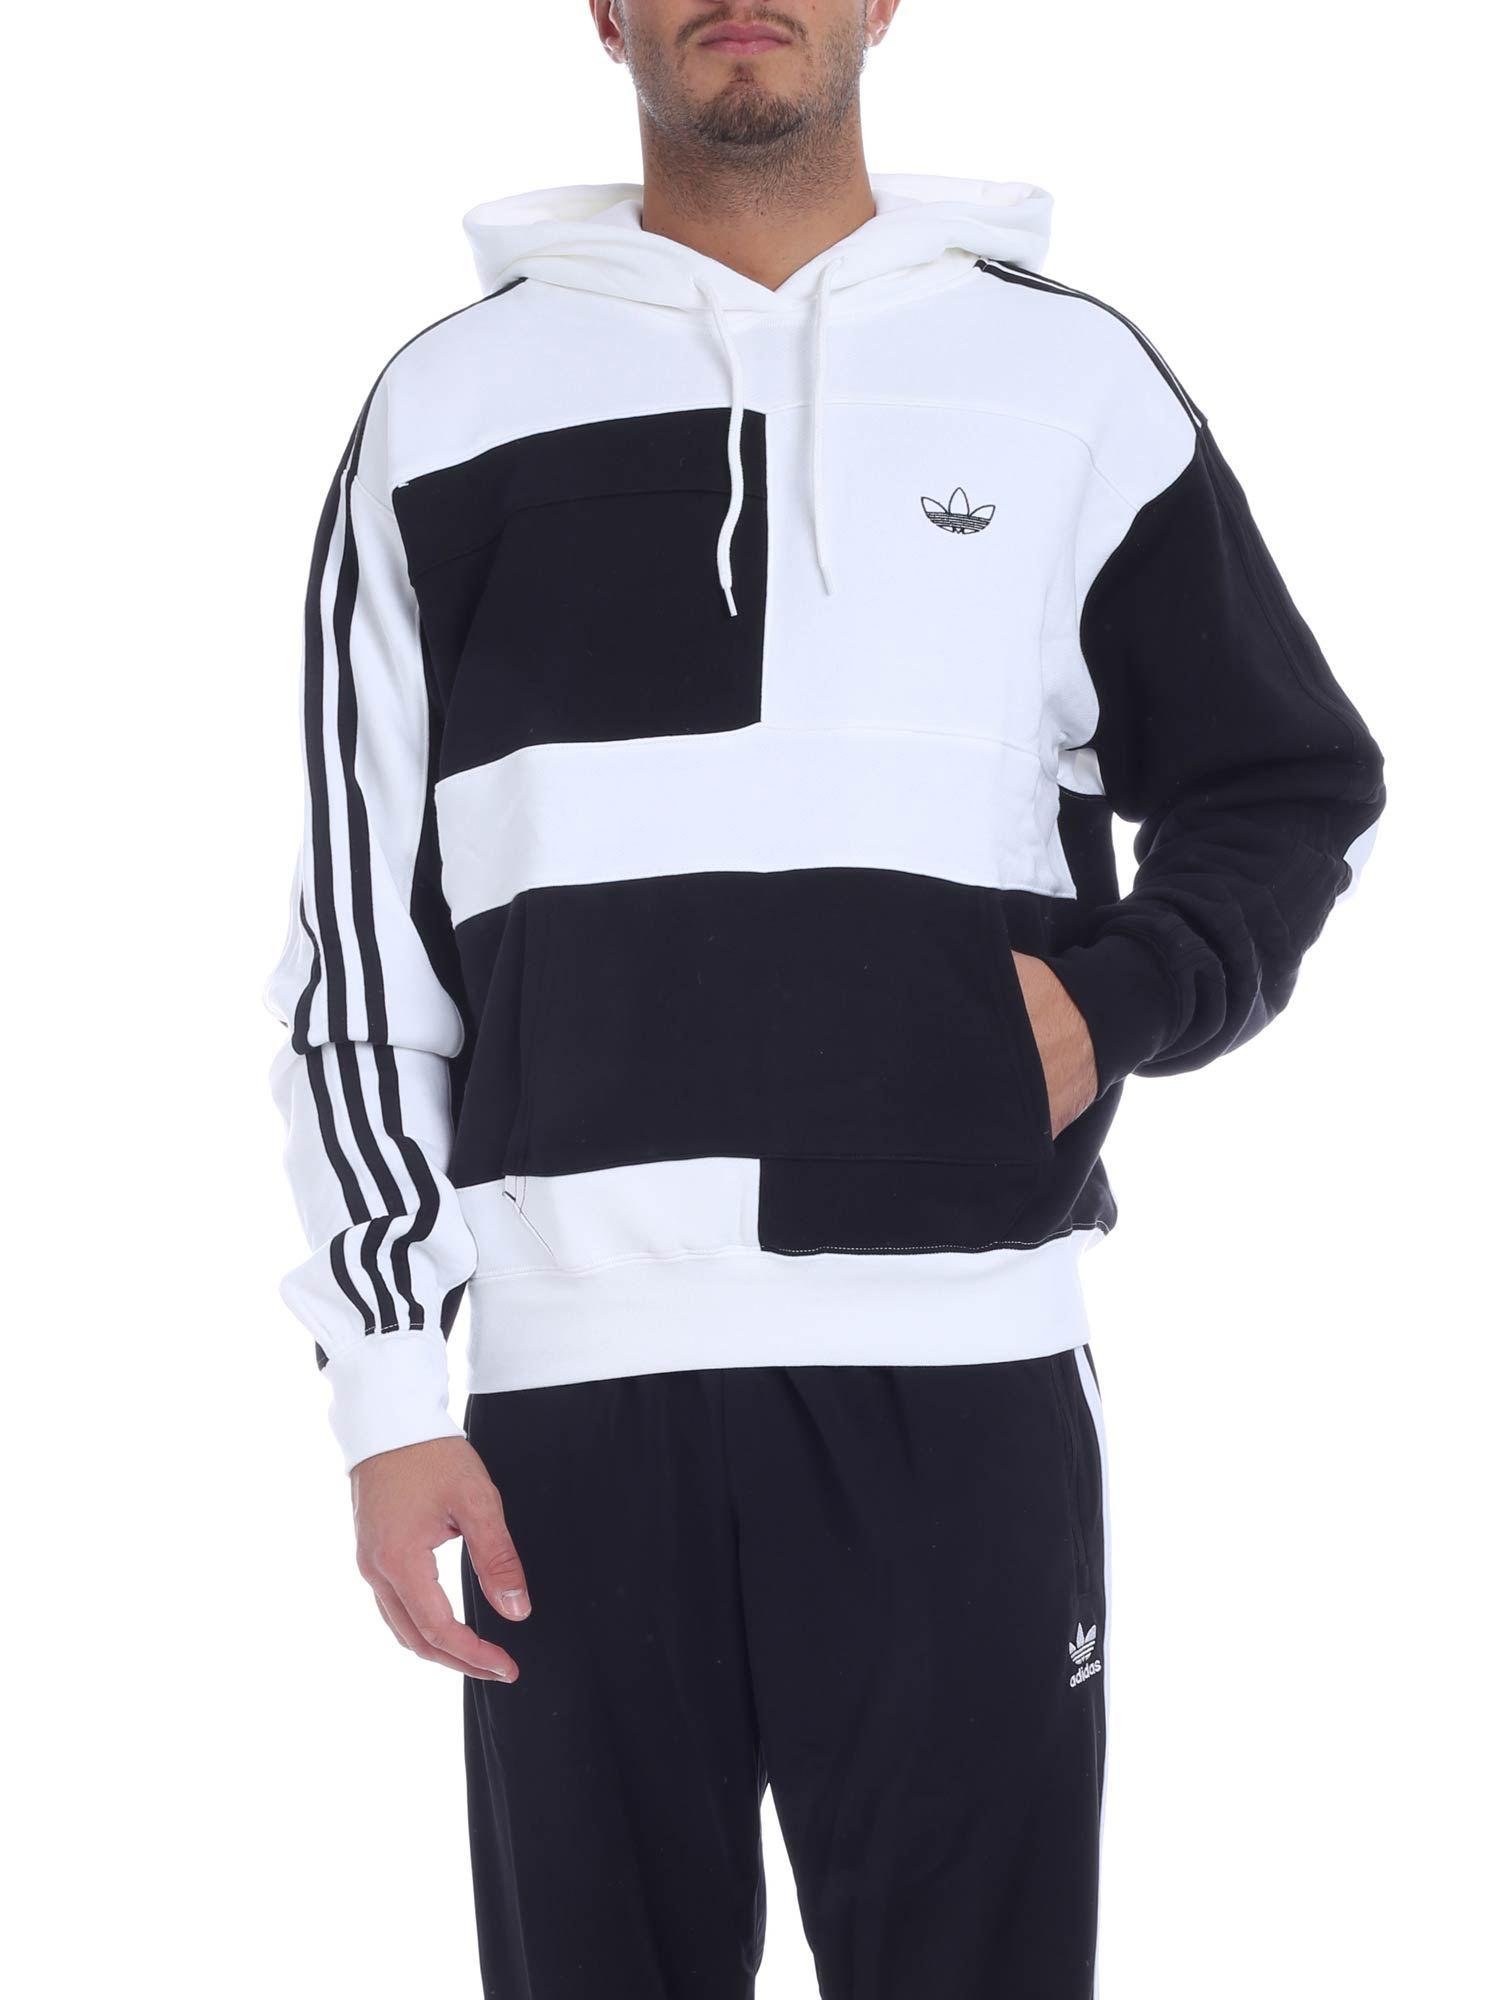 black and white adidas jumper